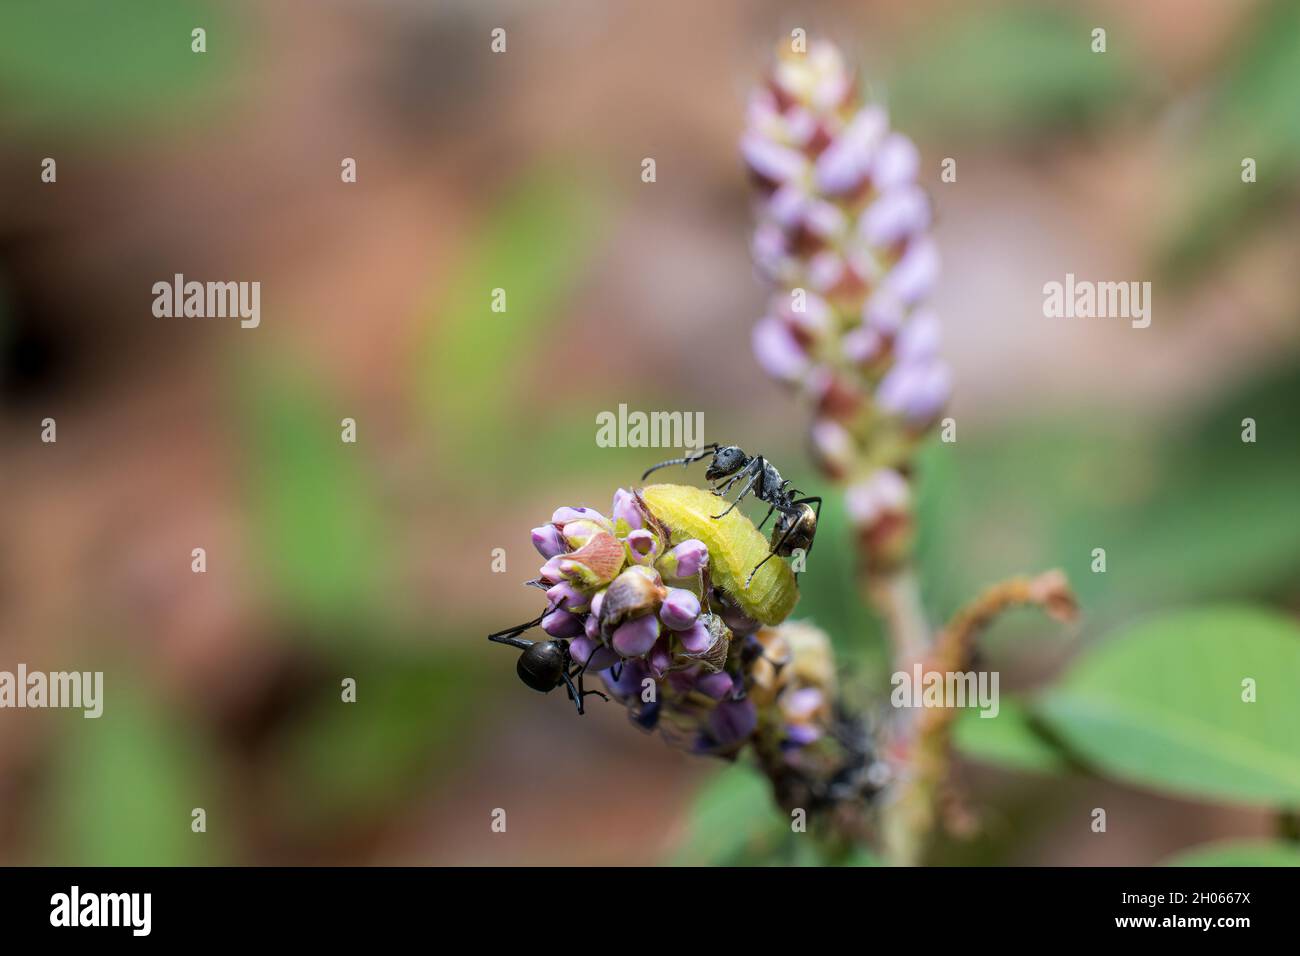 Symbiosis between Forget-me-not larvae and Spiny ant Stock Photo